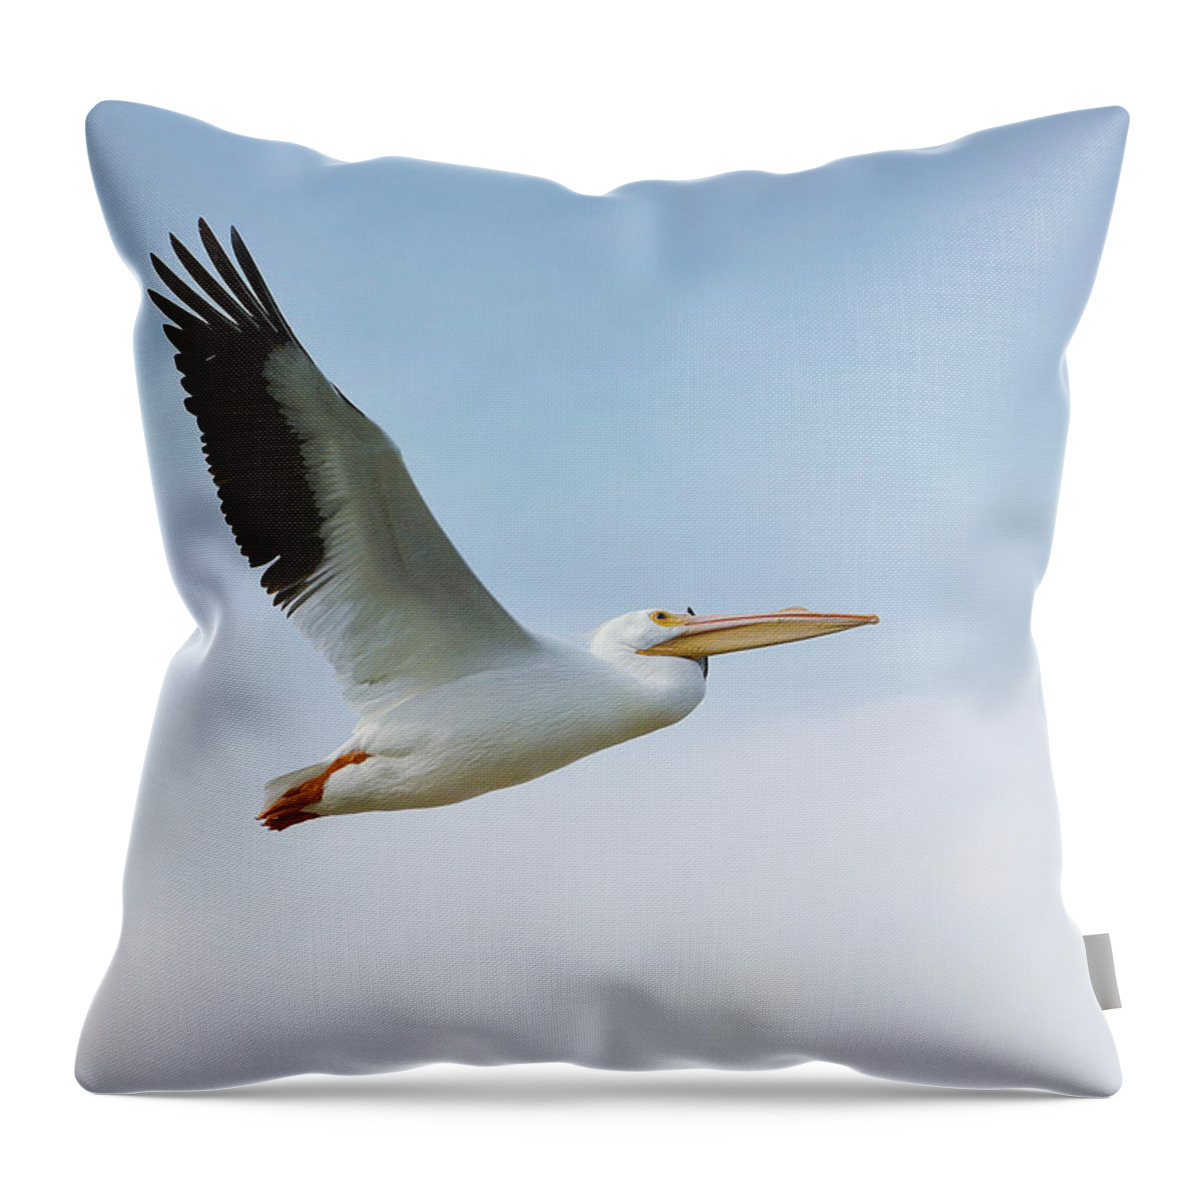 American White Pelican Throw Pillow featuring the photograph Above The Clouds by Fraida Gutovich